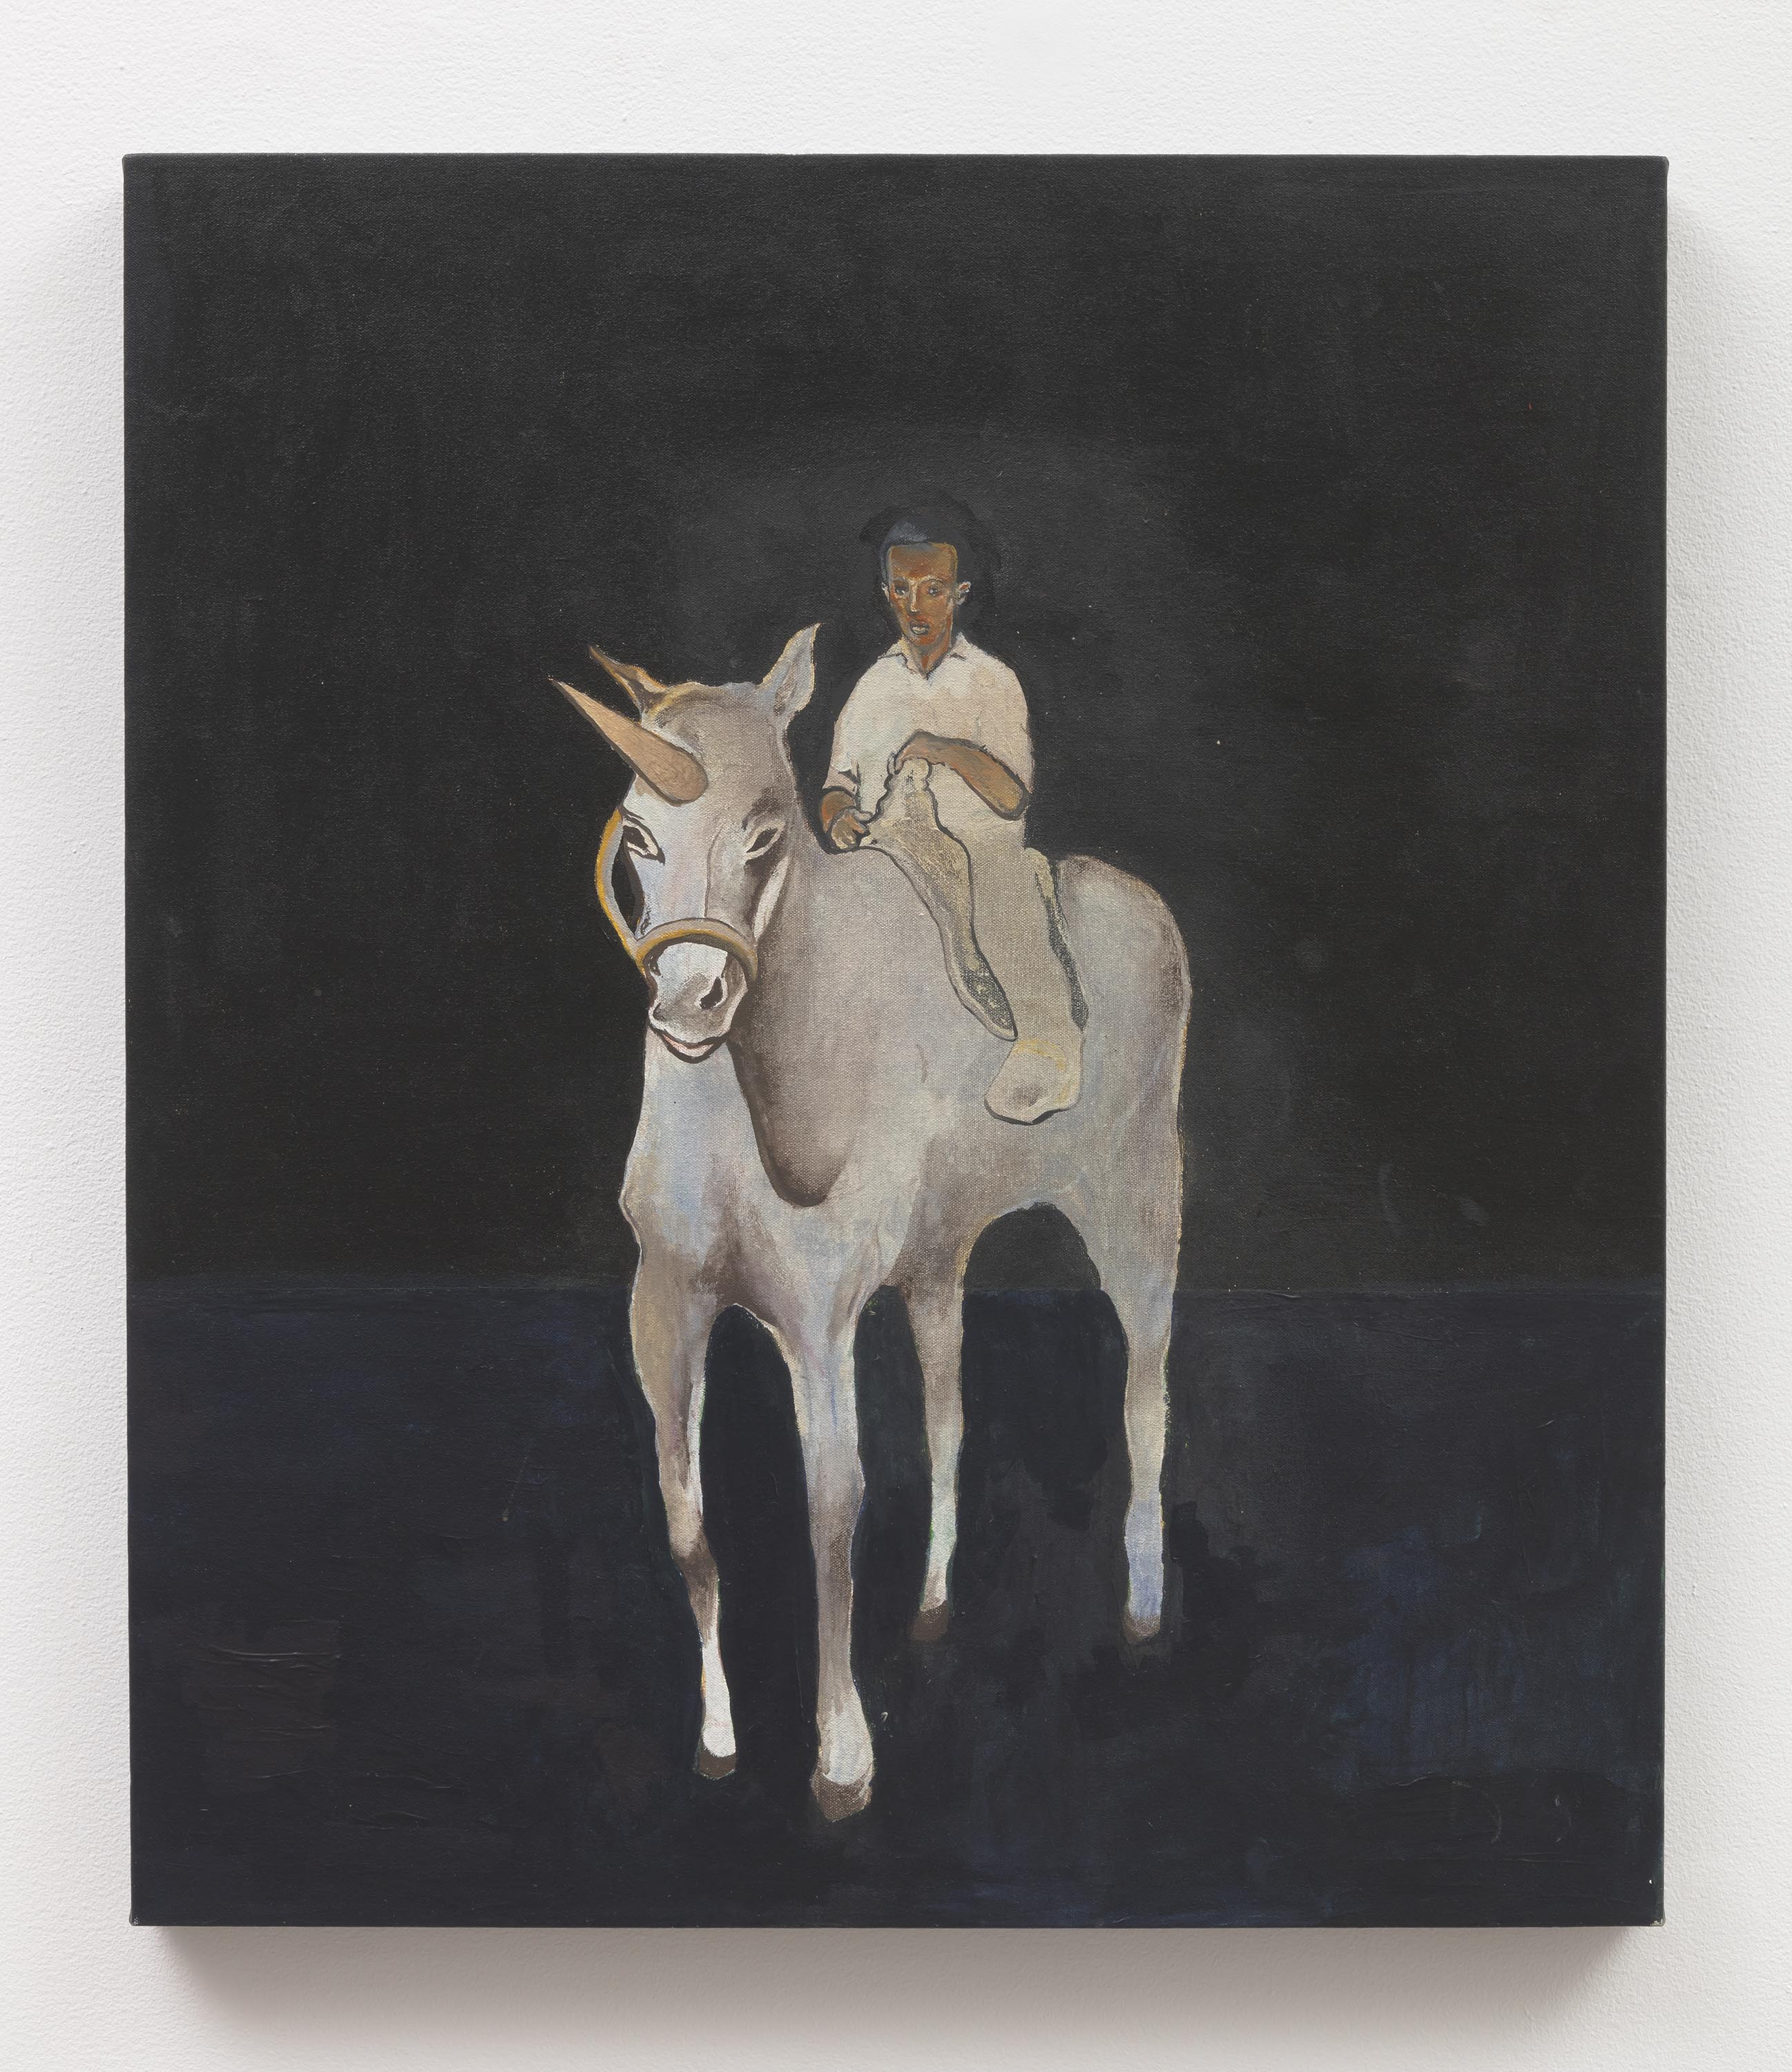 Noah Davis, 40 Acres and a Unicorn, 2007 © The Estate of Noah Davis. Courtesy The Estate of Noah Davis and David Zwirner